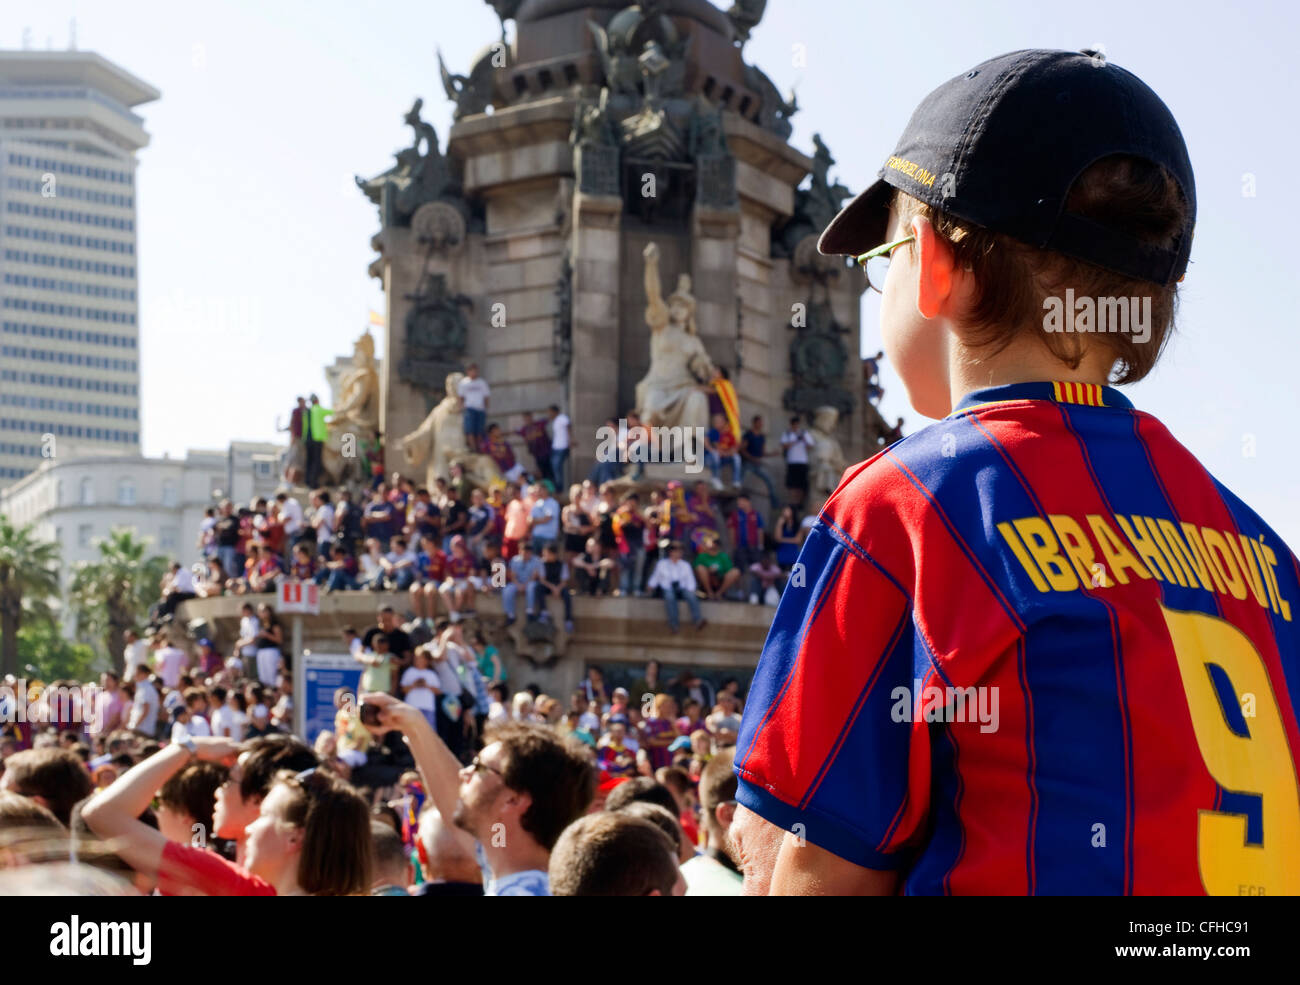 A young boy Barcelona FC fan in a Ibrahimovic strip sits in a crowd of people awaiting for the team to parade the European cup Stock Photo